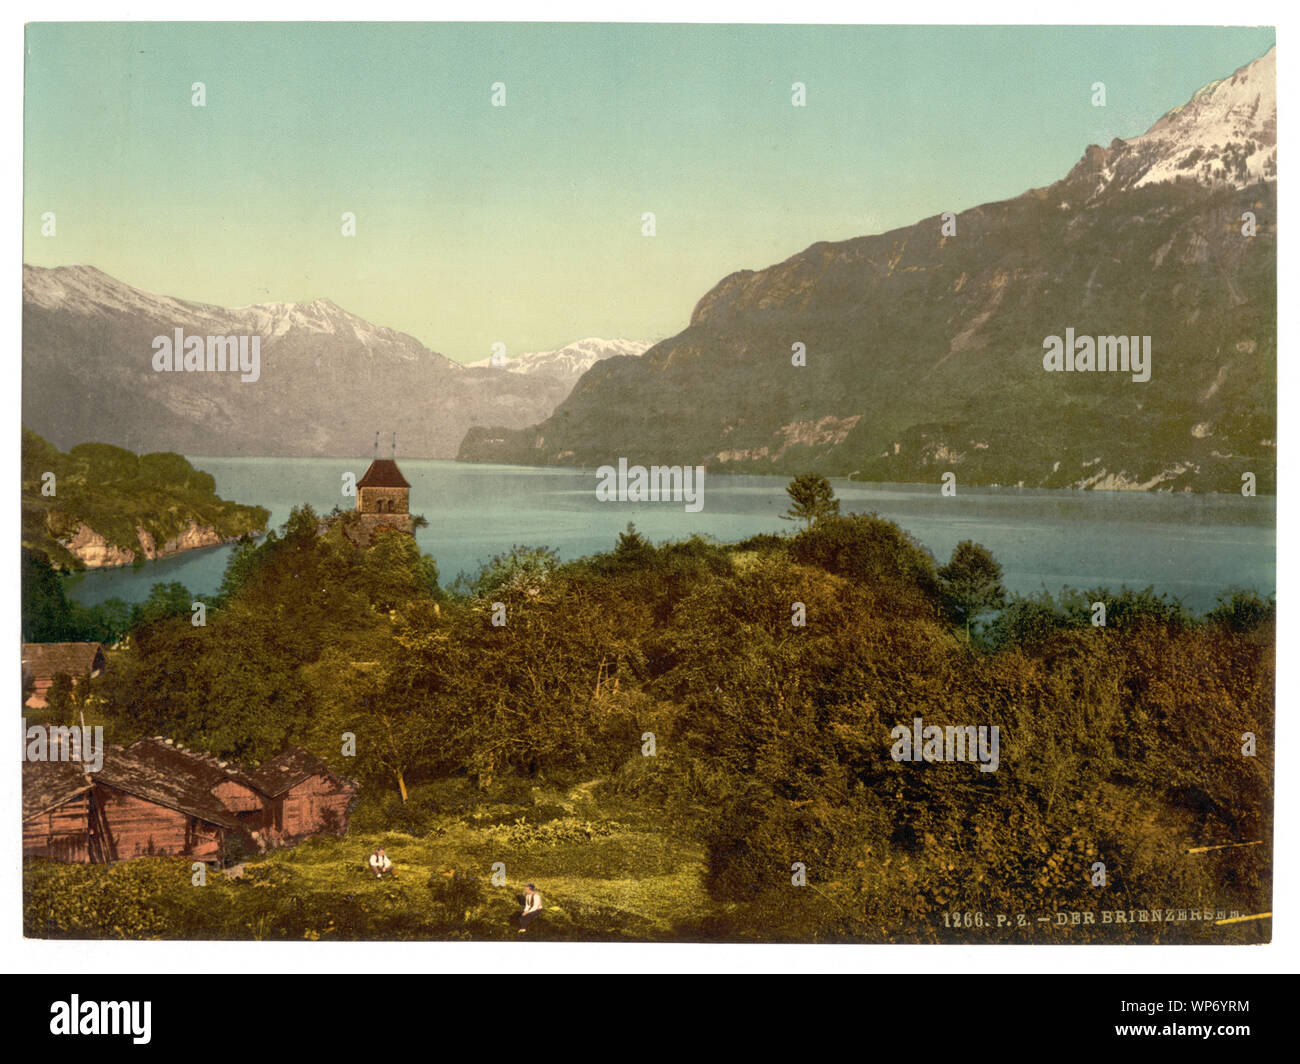 Lake of Brienz, Bernese Oberland, Switzerland; Forms part of: Views of Switzerland in the Photochrom print collection.; Title devised by Library staff.; Print no. 1266.; Stock Photo